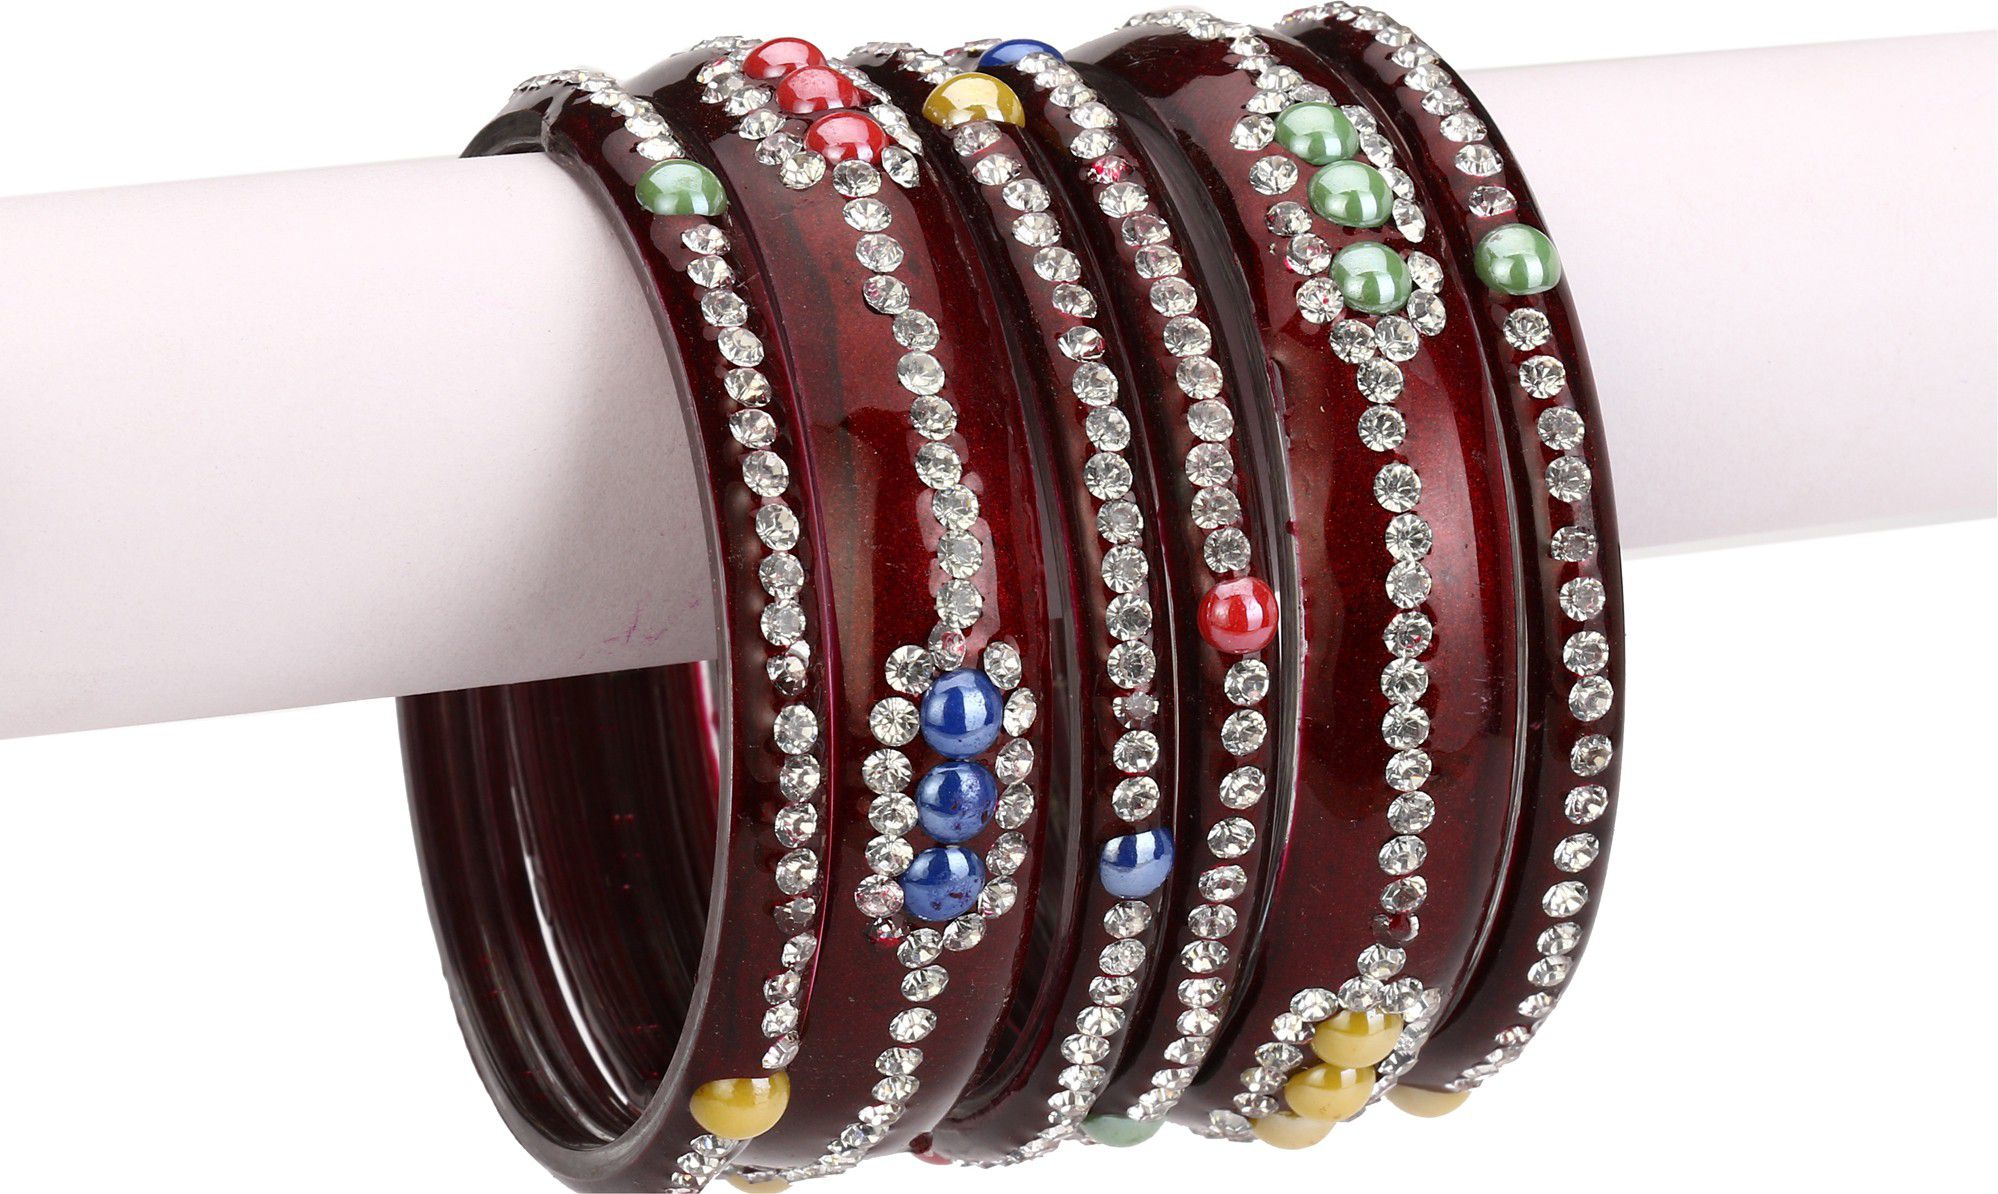     			Somil Maroon Color 2 & 4 Bangle Set decorative With Colorful Beads & Stones With Safety Box-DO_2.6